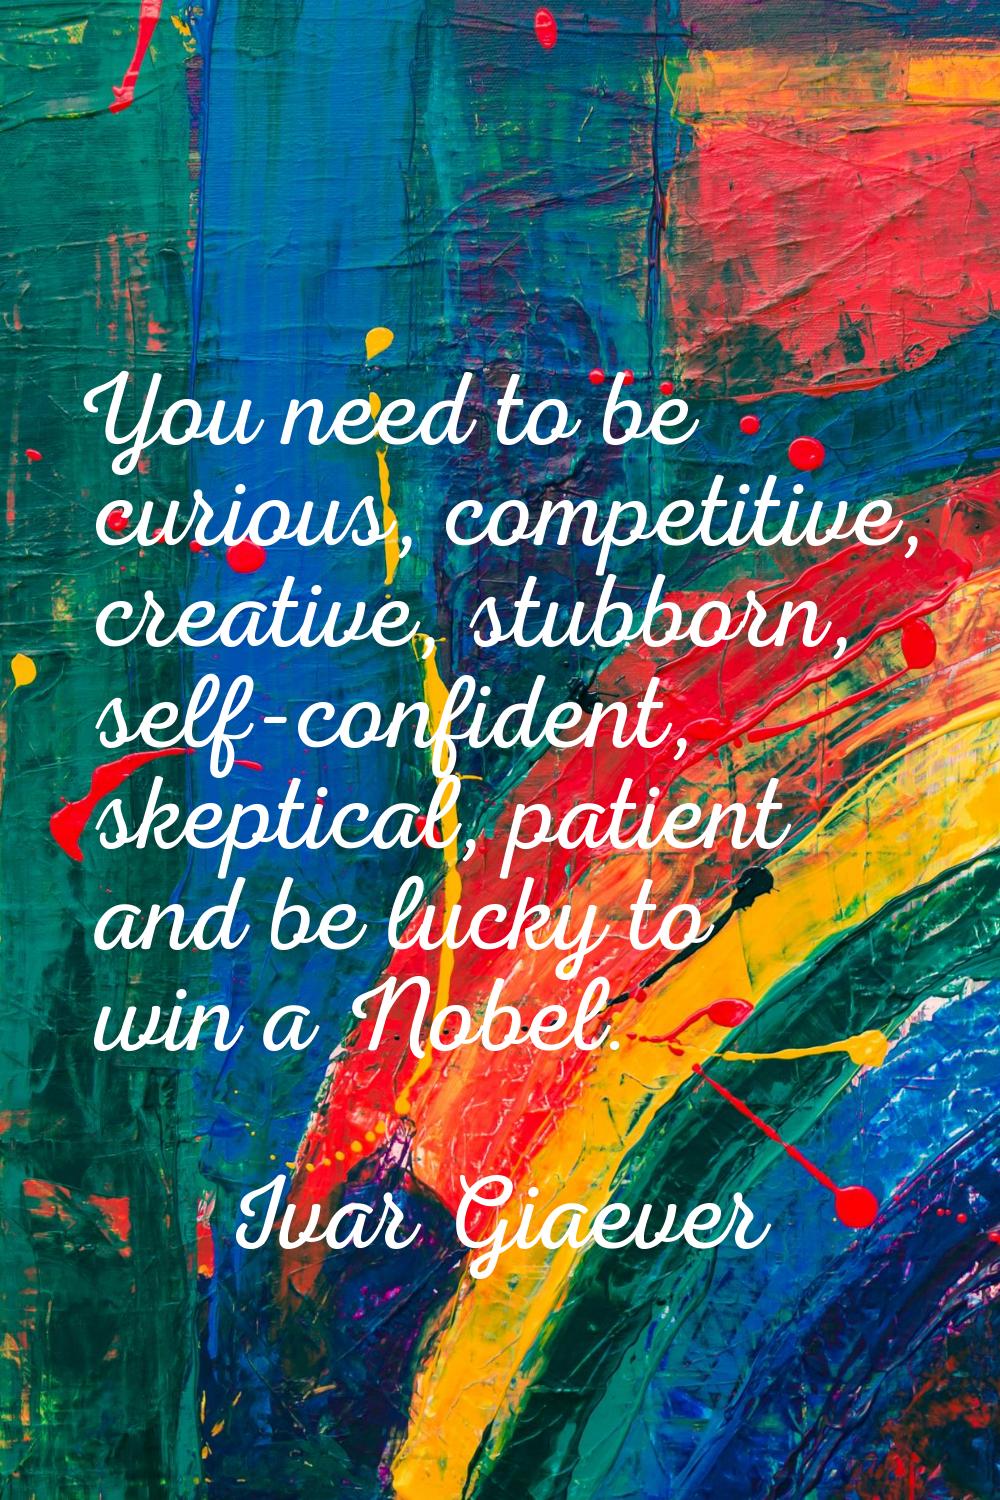 You need to be curious, competitive, creative, stubborn, self-confident, skeptical, patient and be 